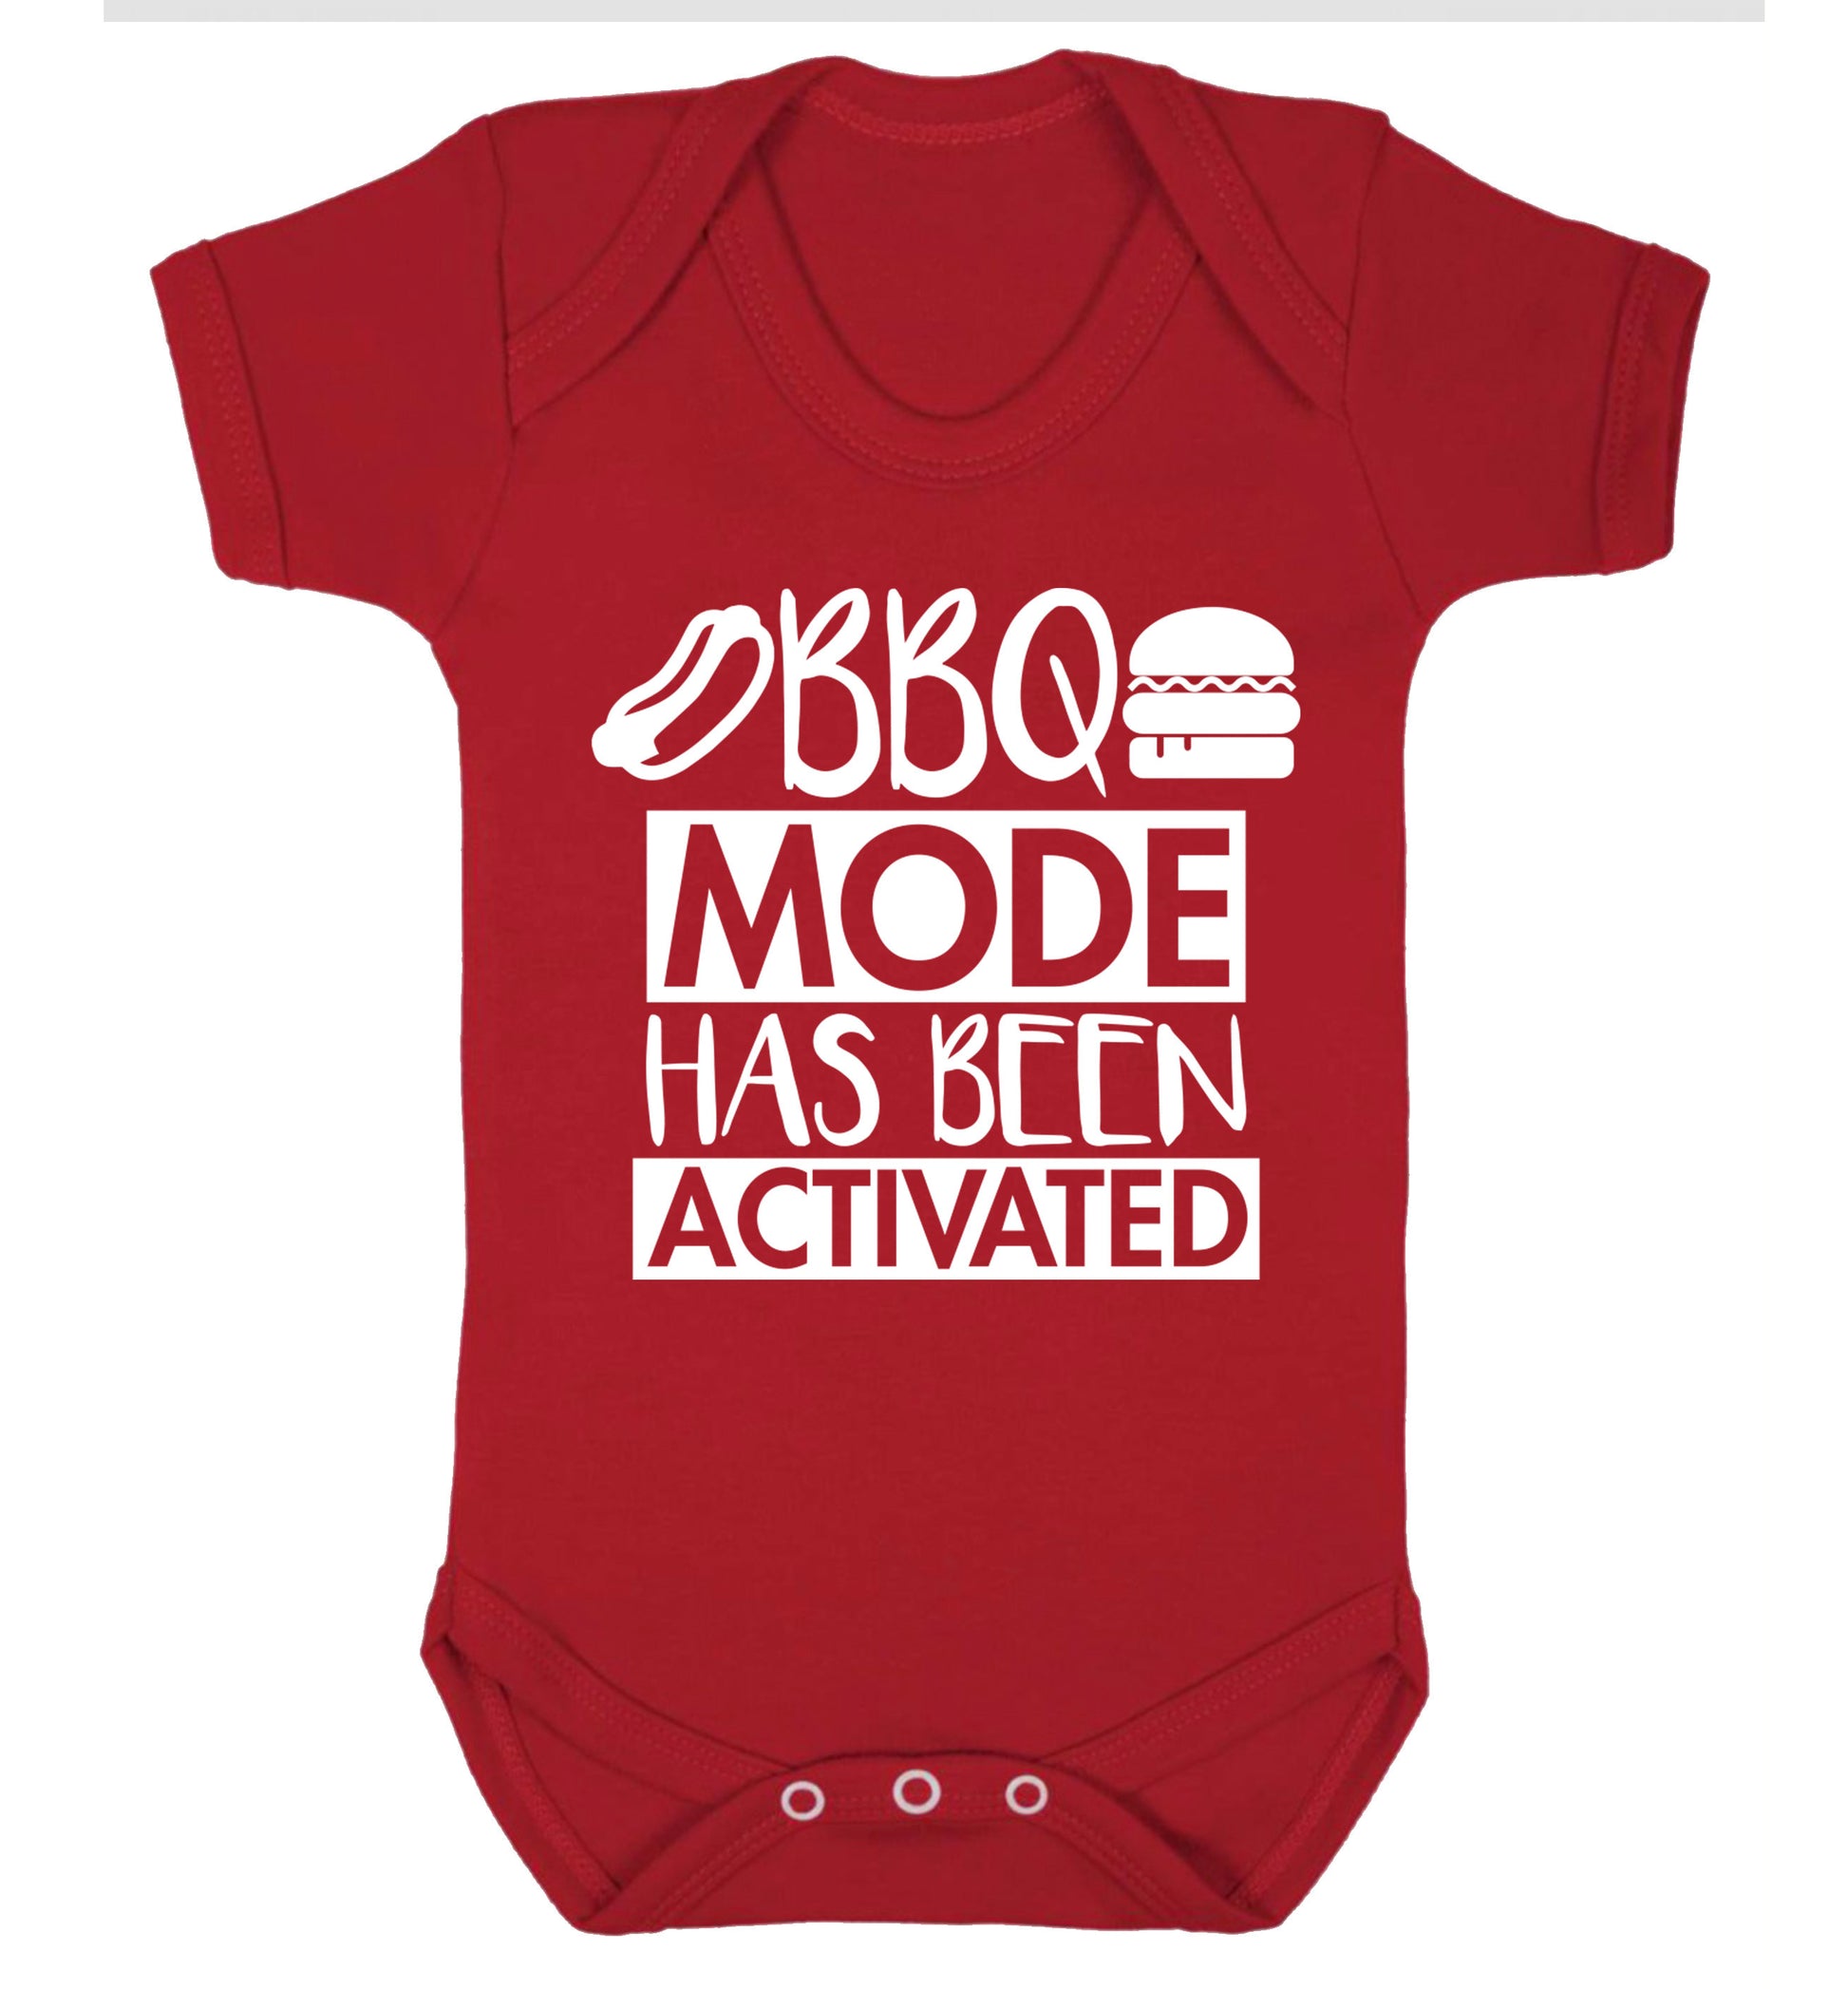 Bbq mode has been activated Baby Vest red 18-24 months